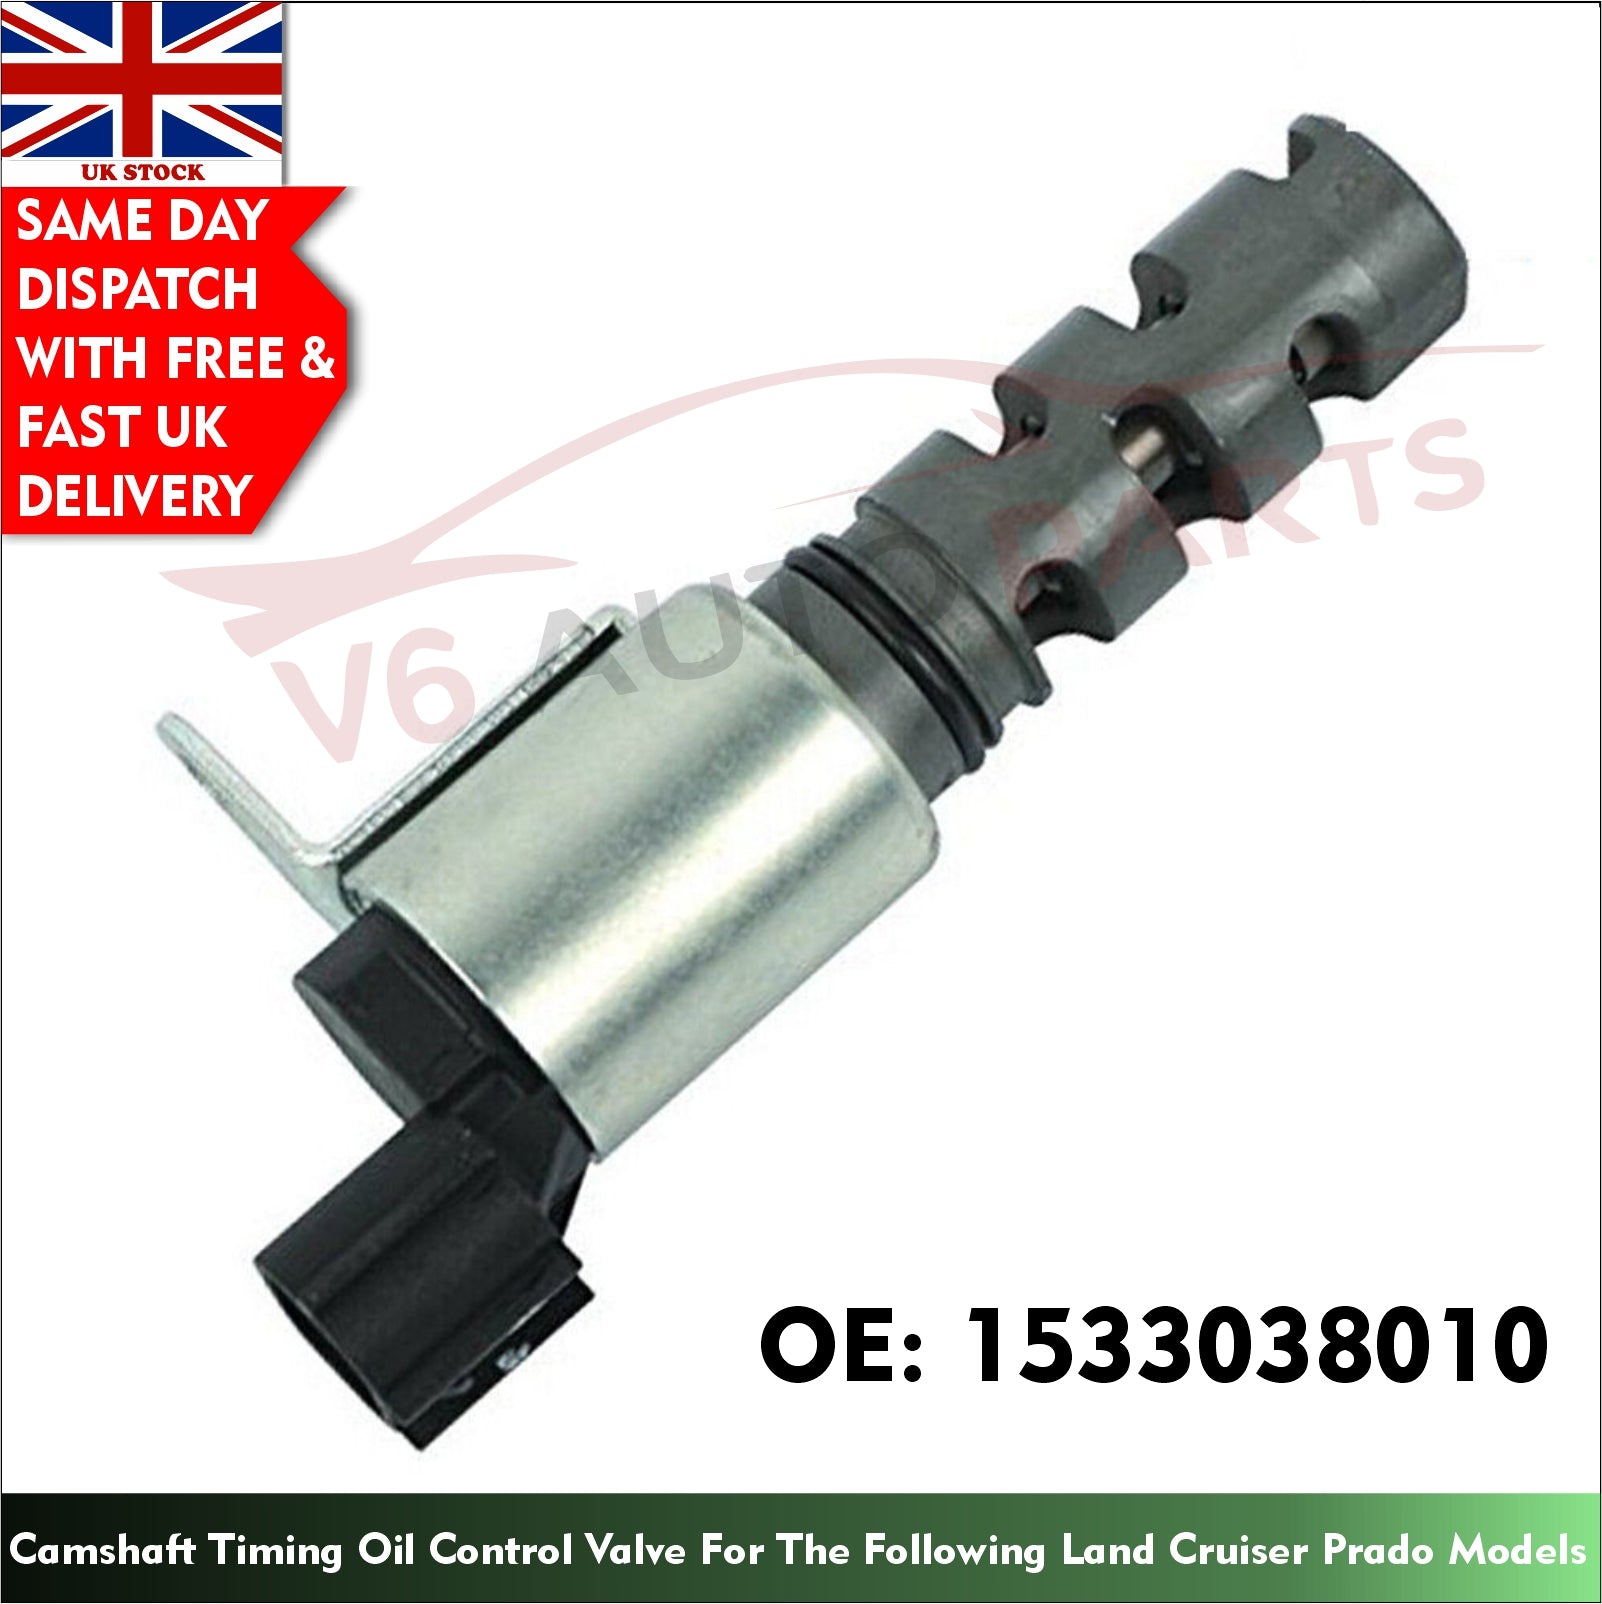 CAMSHAFT TIMING OIL CONTROL VALVE  FOR THE FOLLOWING 2004 - 2016 MARK X MODELS